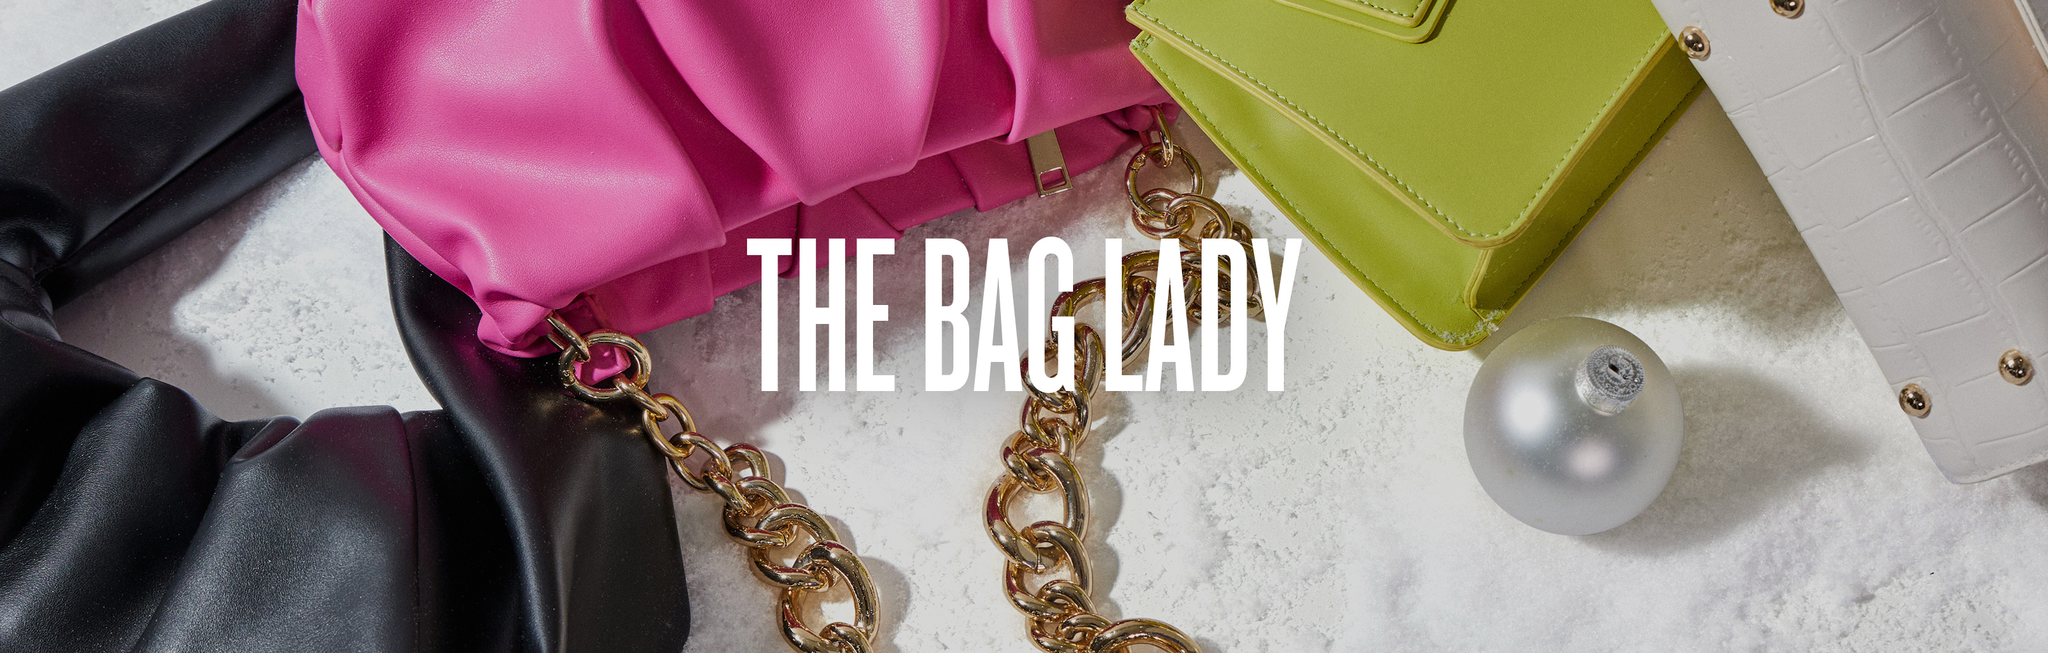 The Bag Lady